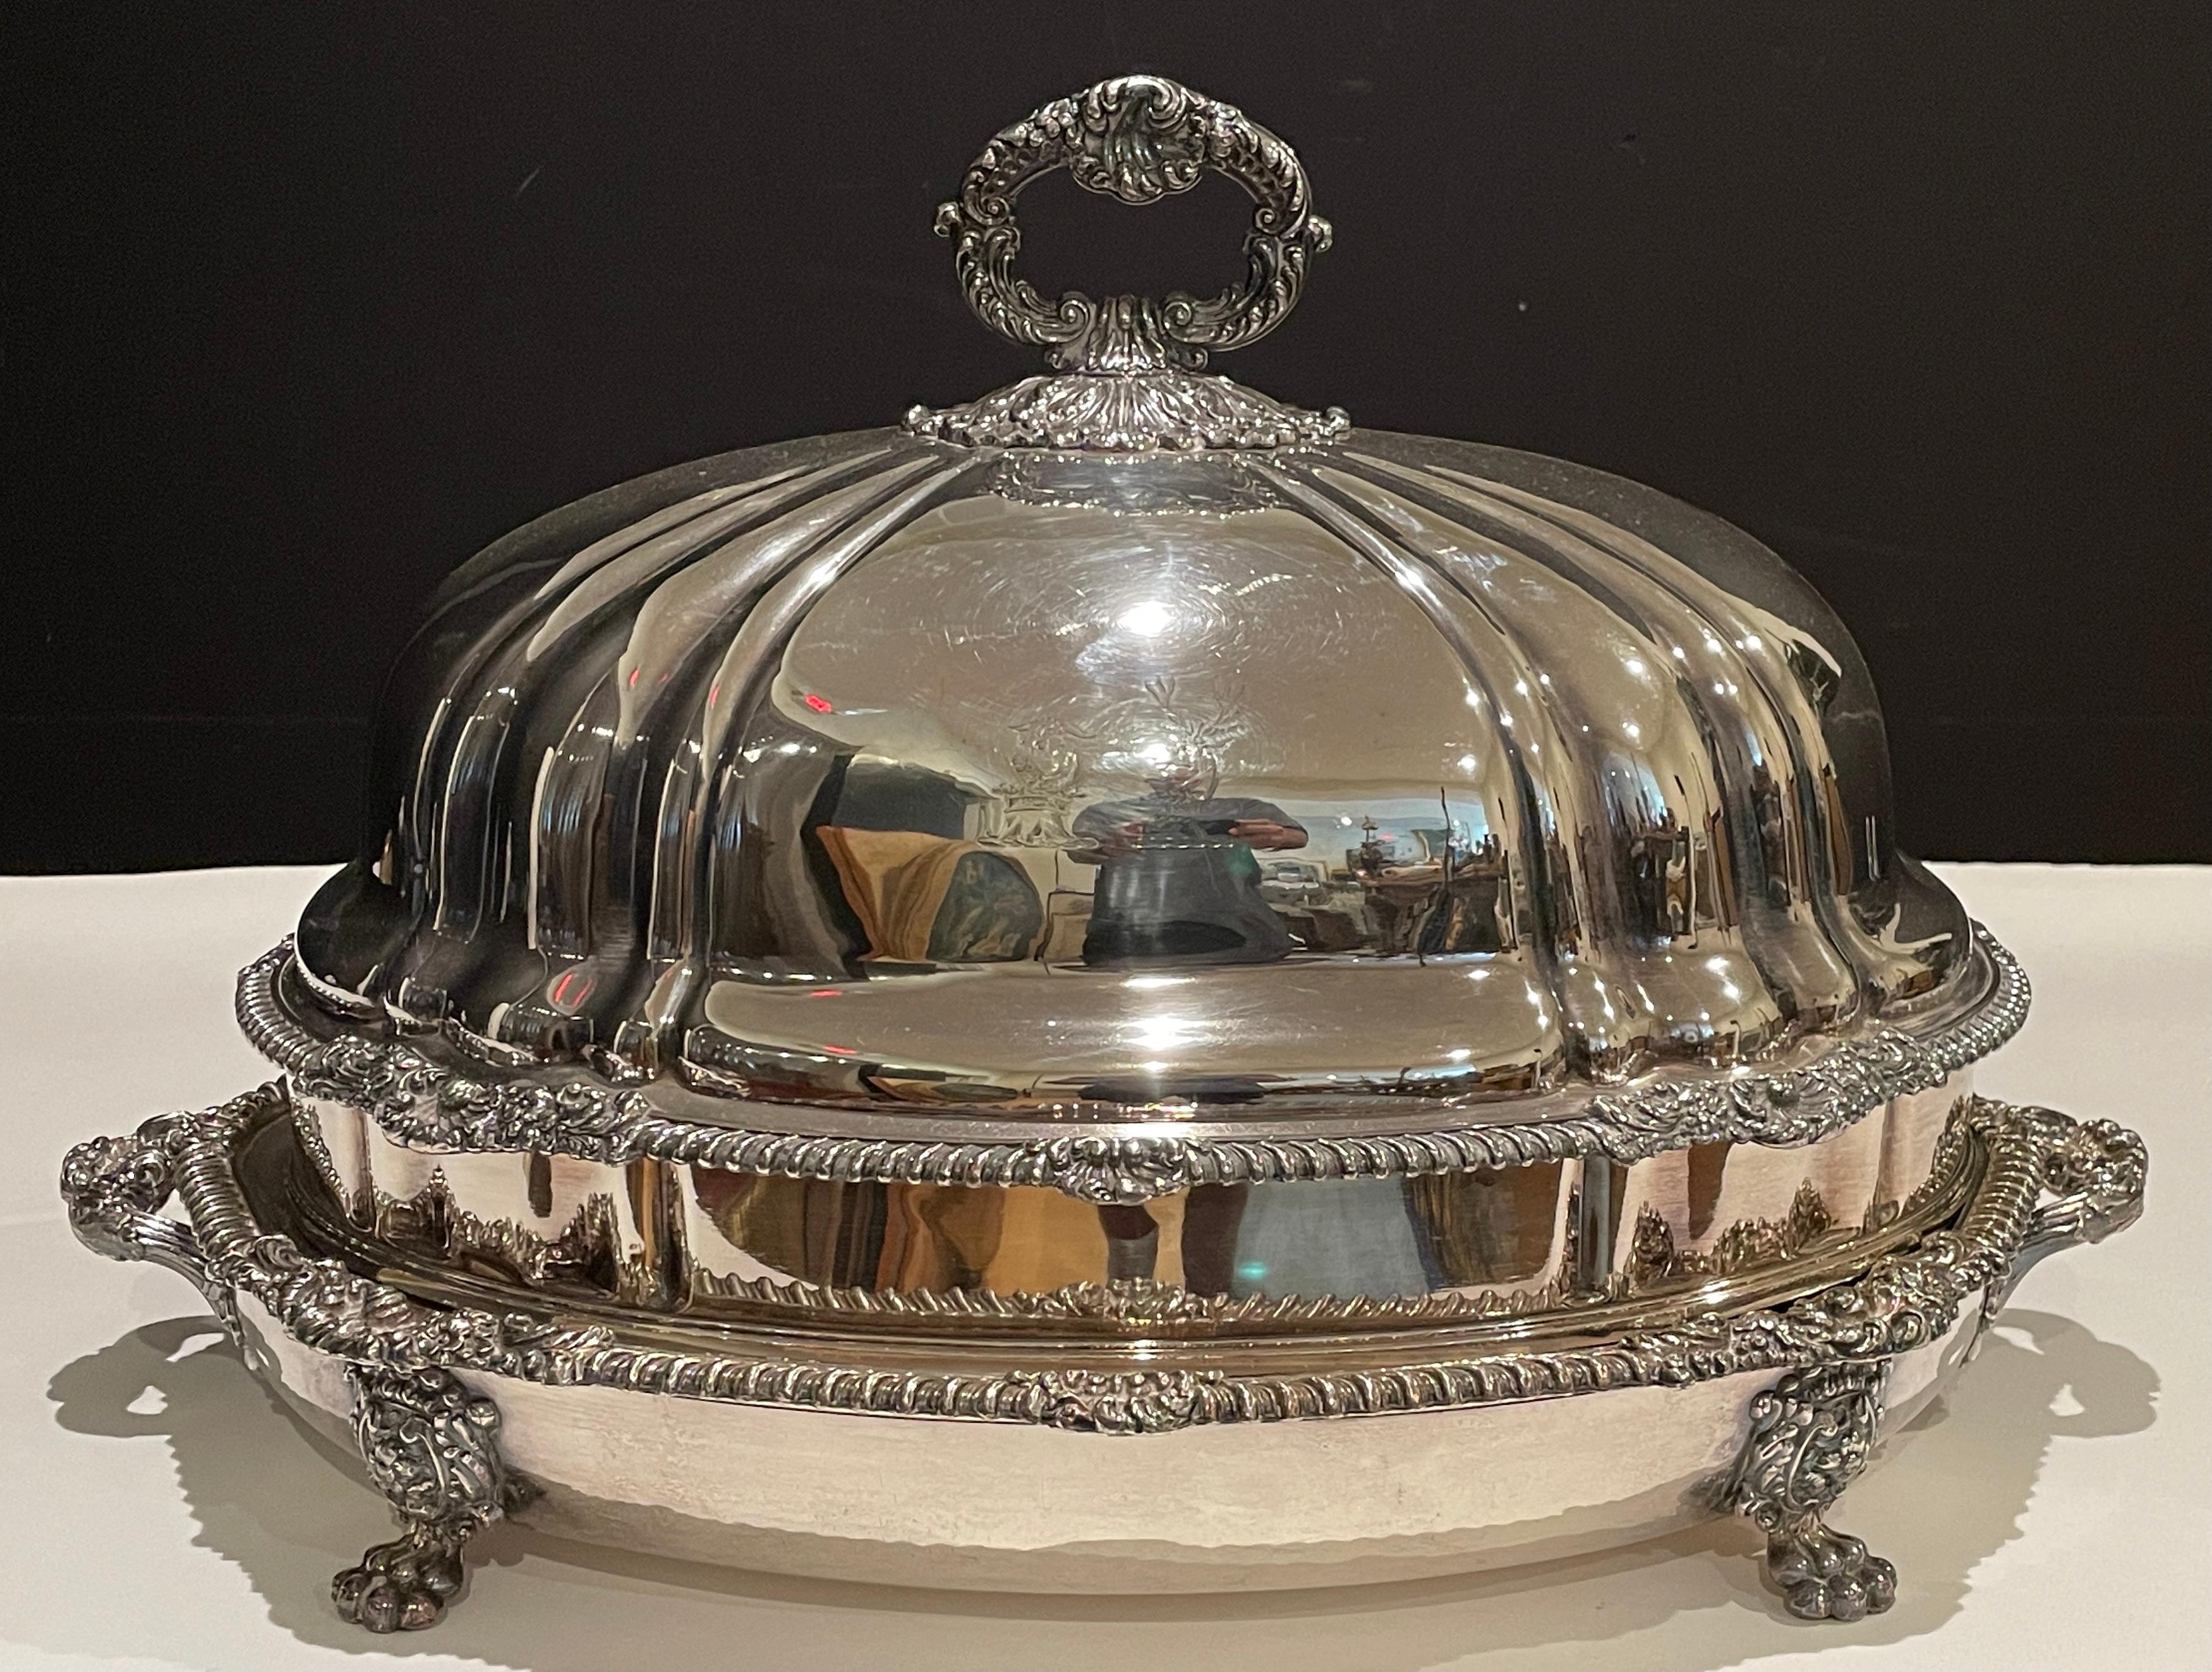 Lamb and venison meat dish is masterfully crafted of fine Old Sheffield silver plate. This dish is crafted with the utmost intricacy in a manner one would expect from a sterling counterpart. The rich leaf motif extends from the scrolling feet and